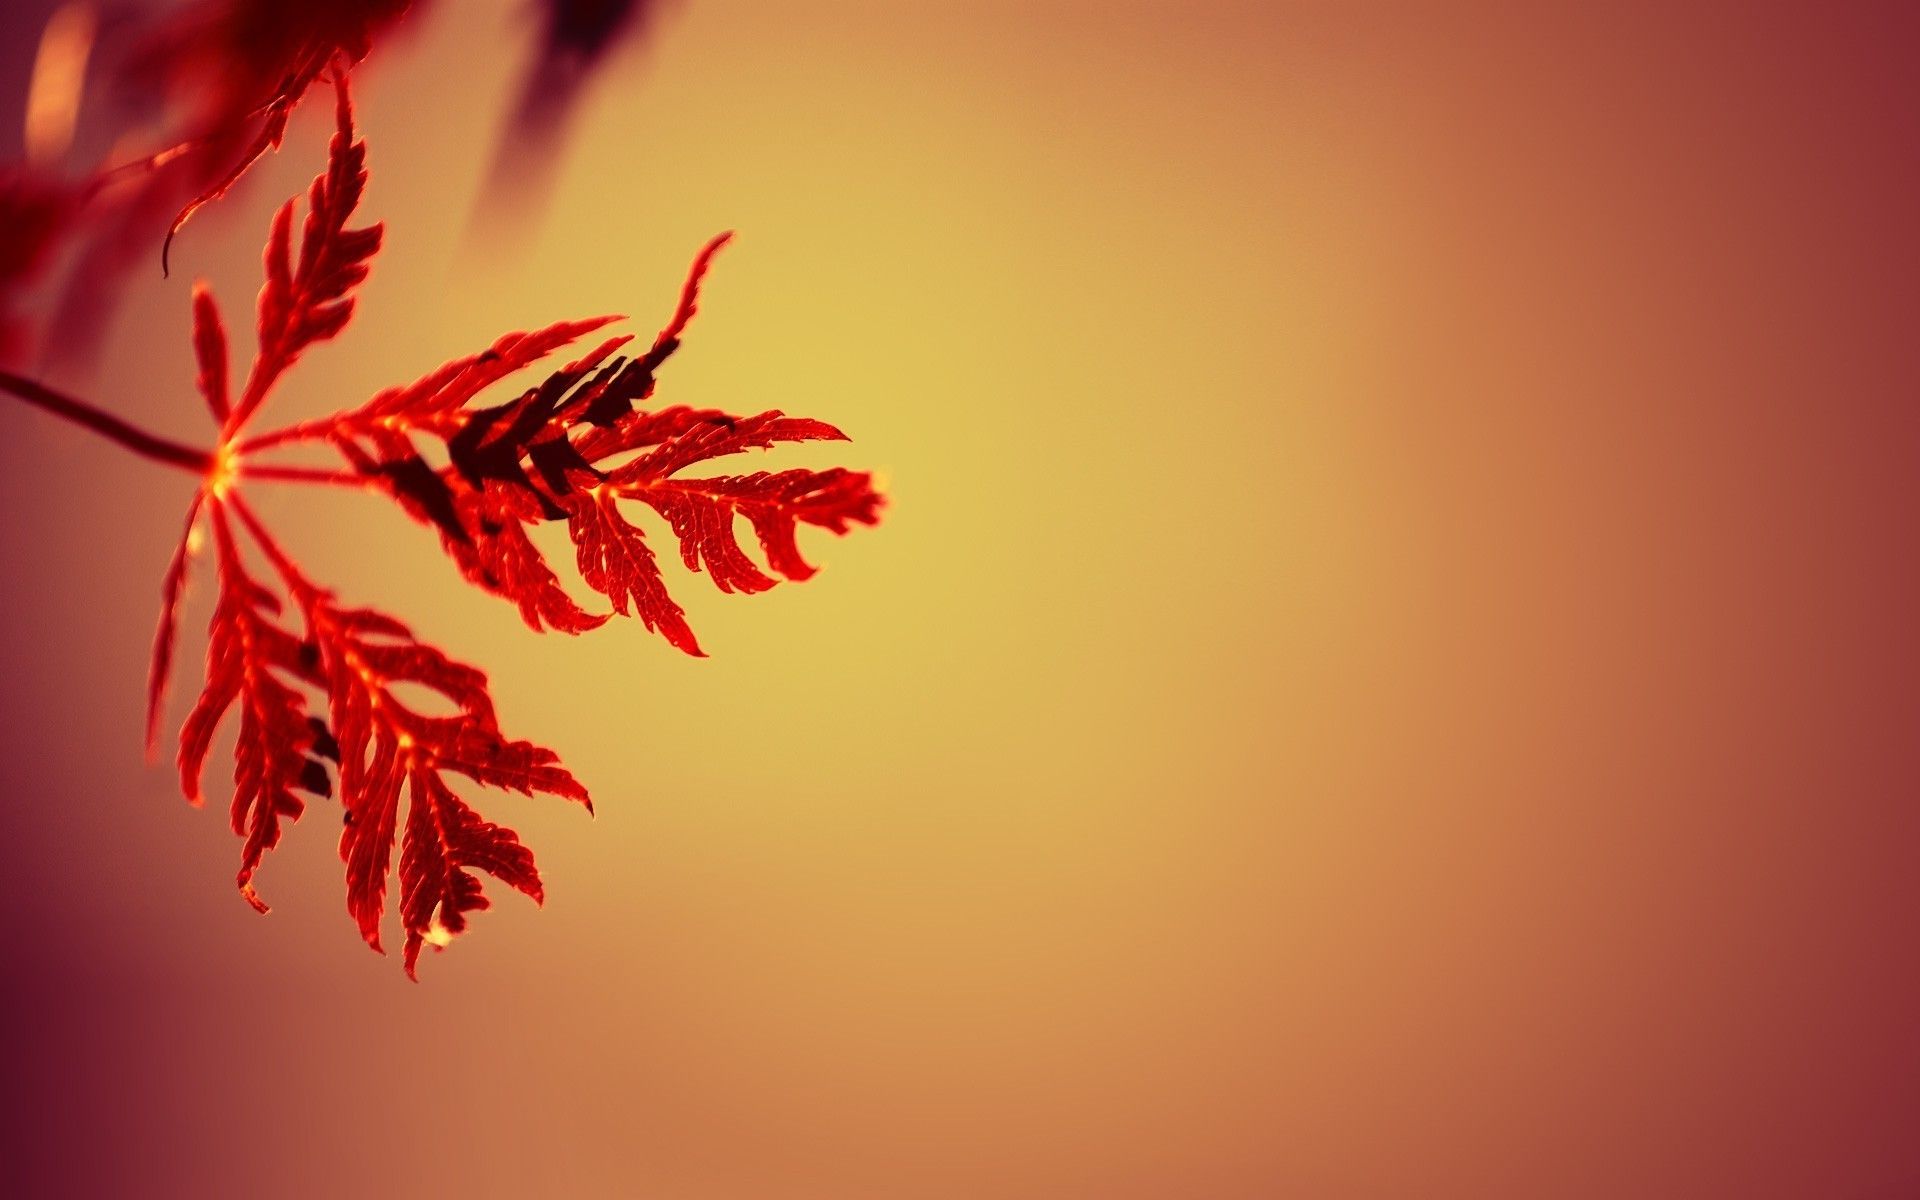 Wallpaper, 1920x1200 px, depth of field, gradient, leaves, macro, nature, red, simple background 1920x1200